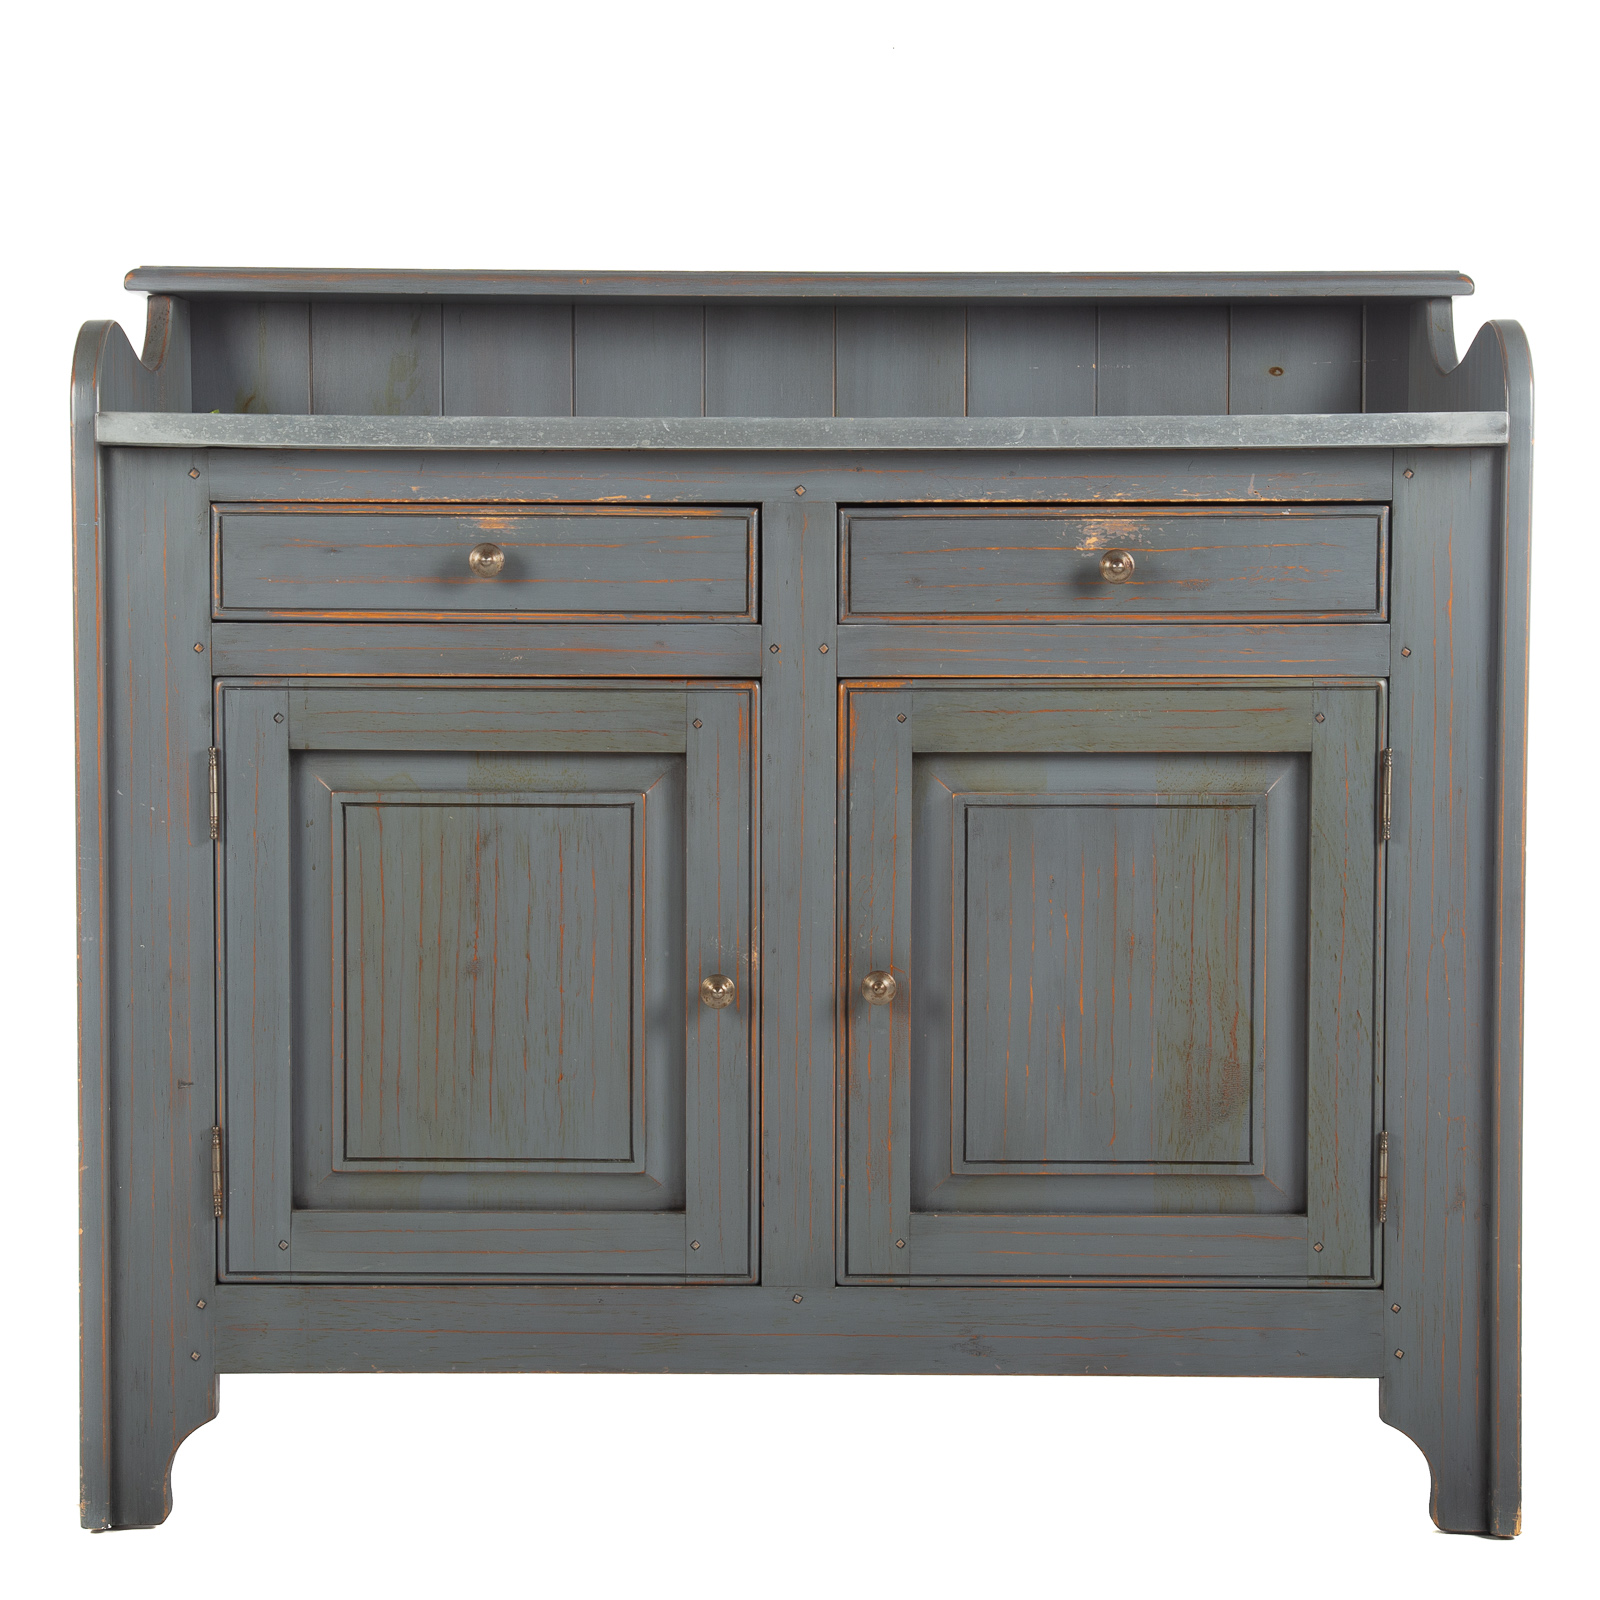 RUSTIC STYLE PAINTED WOOD BUFFET